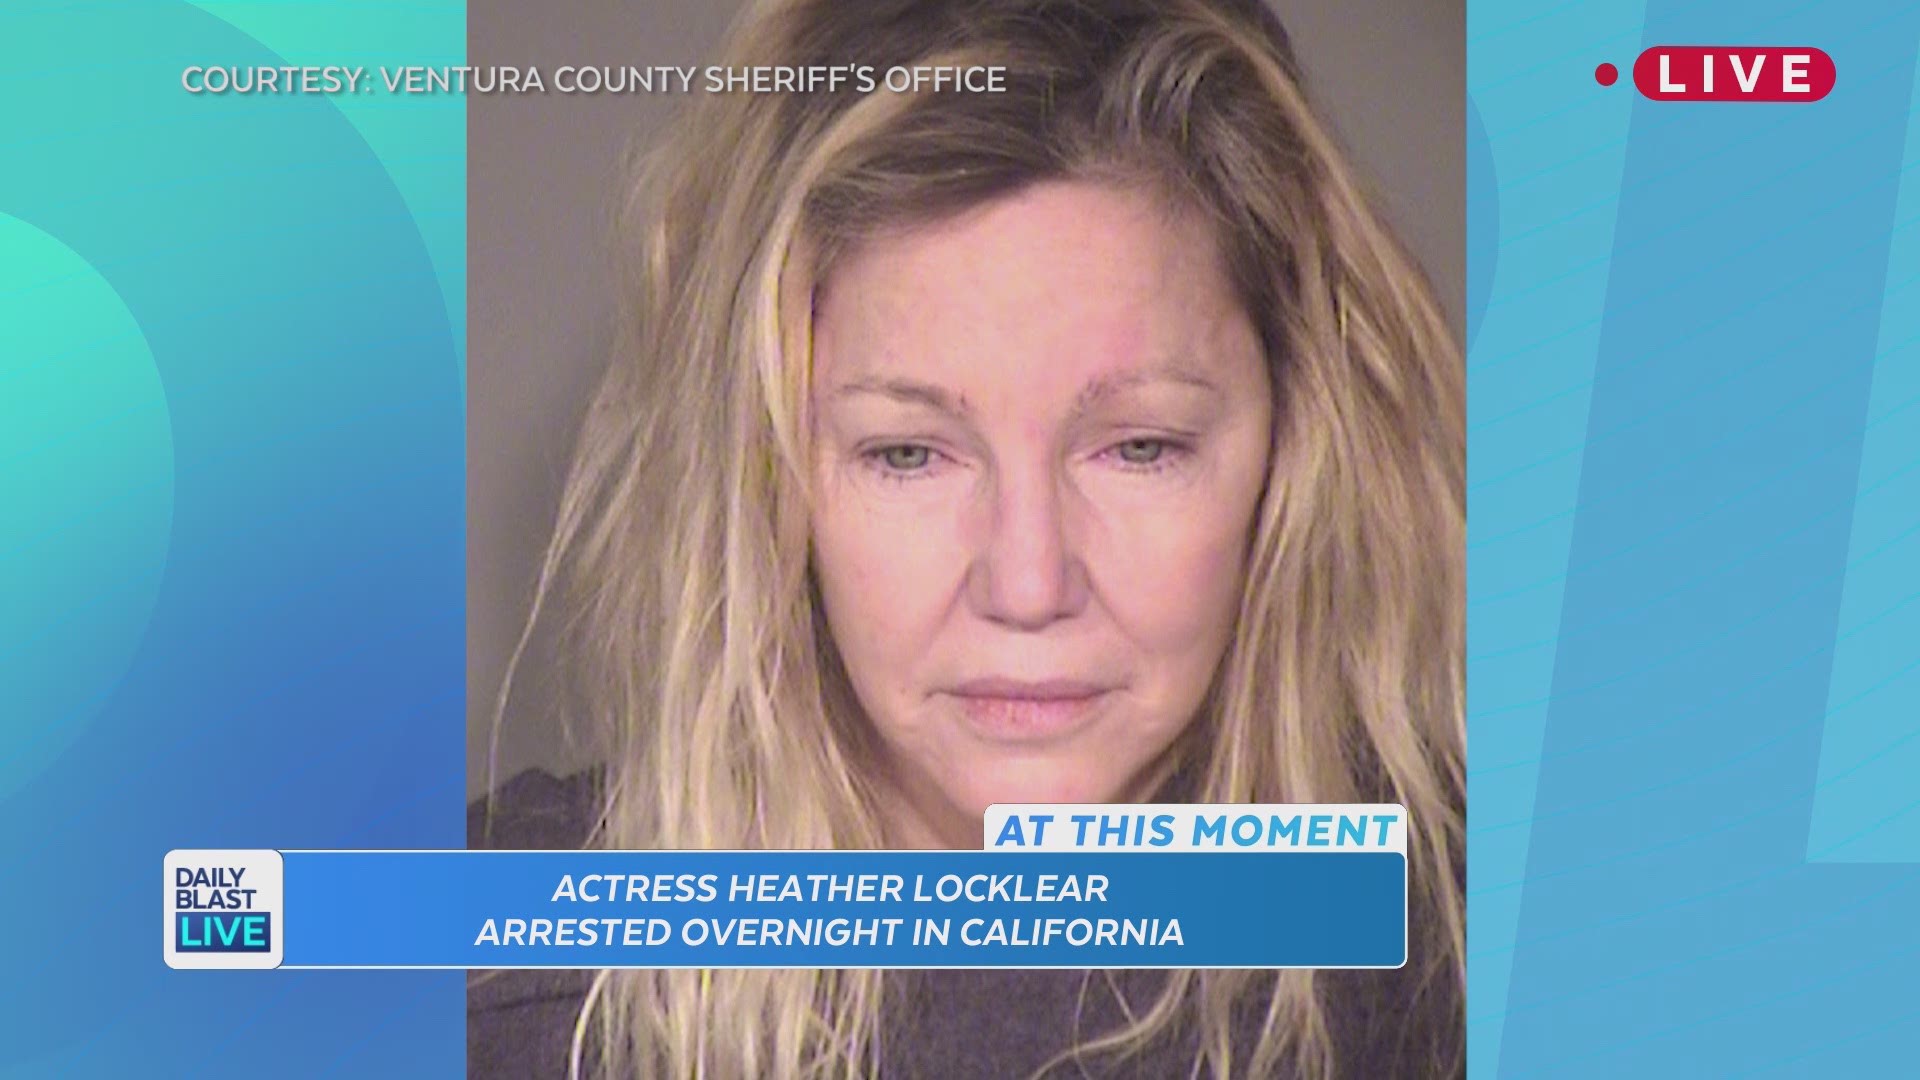 Actress Heather Locklear was arrested Sunday night in Ventura County, California and charged with two misdemeanor counts of battery against police and emergency personnel. The new arrest comes one week after she was hospitalized following a 911 call and f